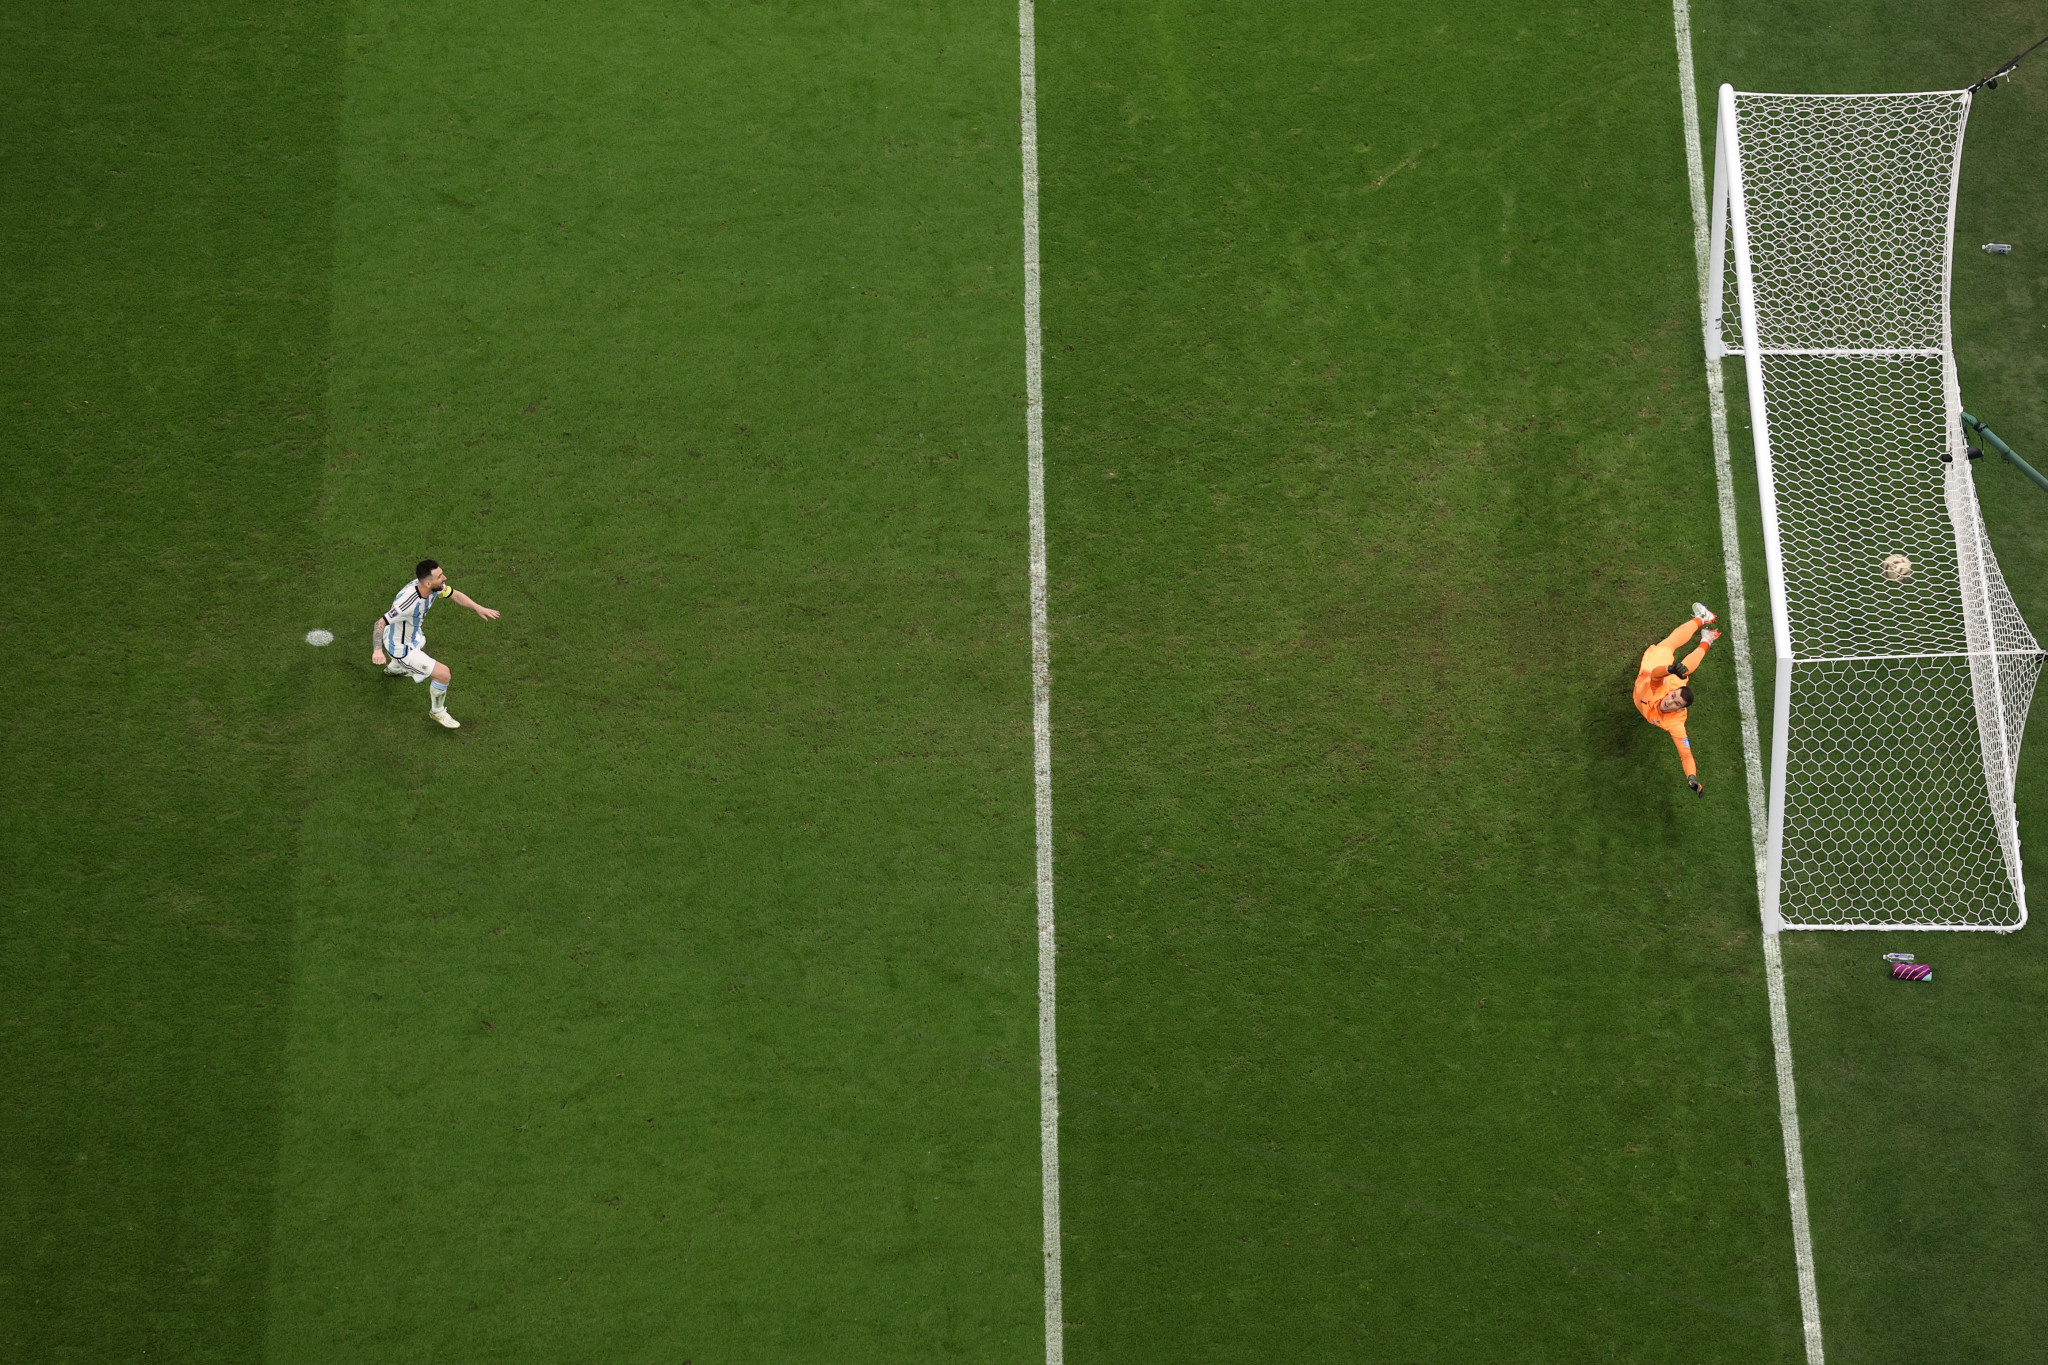 Lionel Messi's penalty past Dominic Livakovic opened the scoring for Argentina ©Getty Images